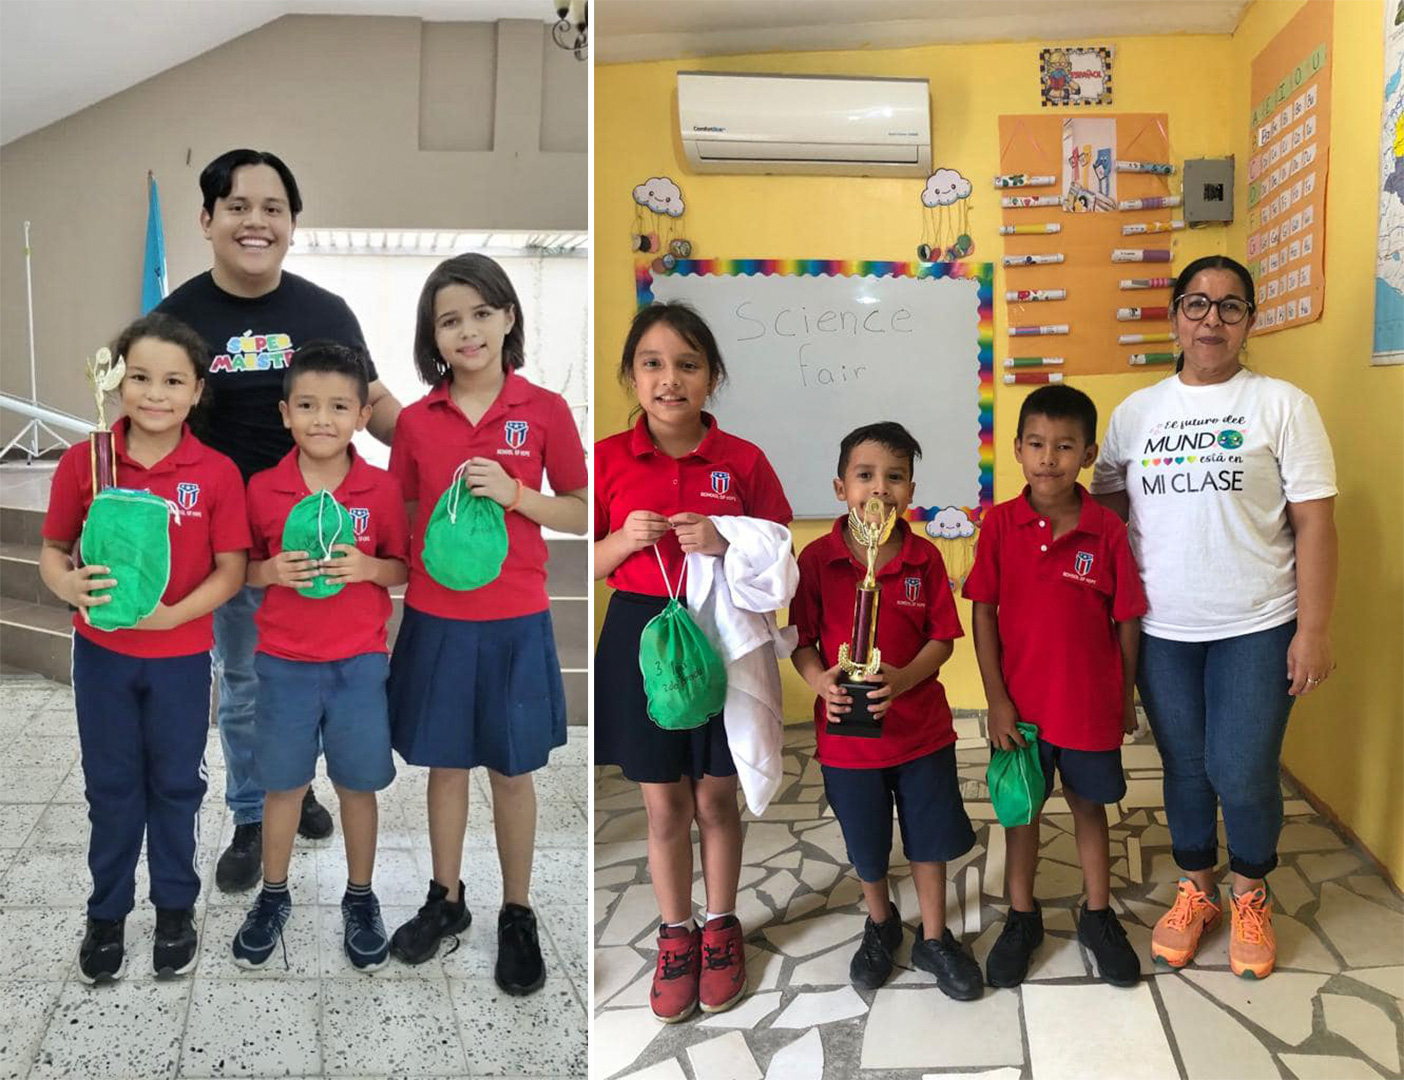 Congratulations to the first winners of LIT School of Hope’s science fair!